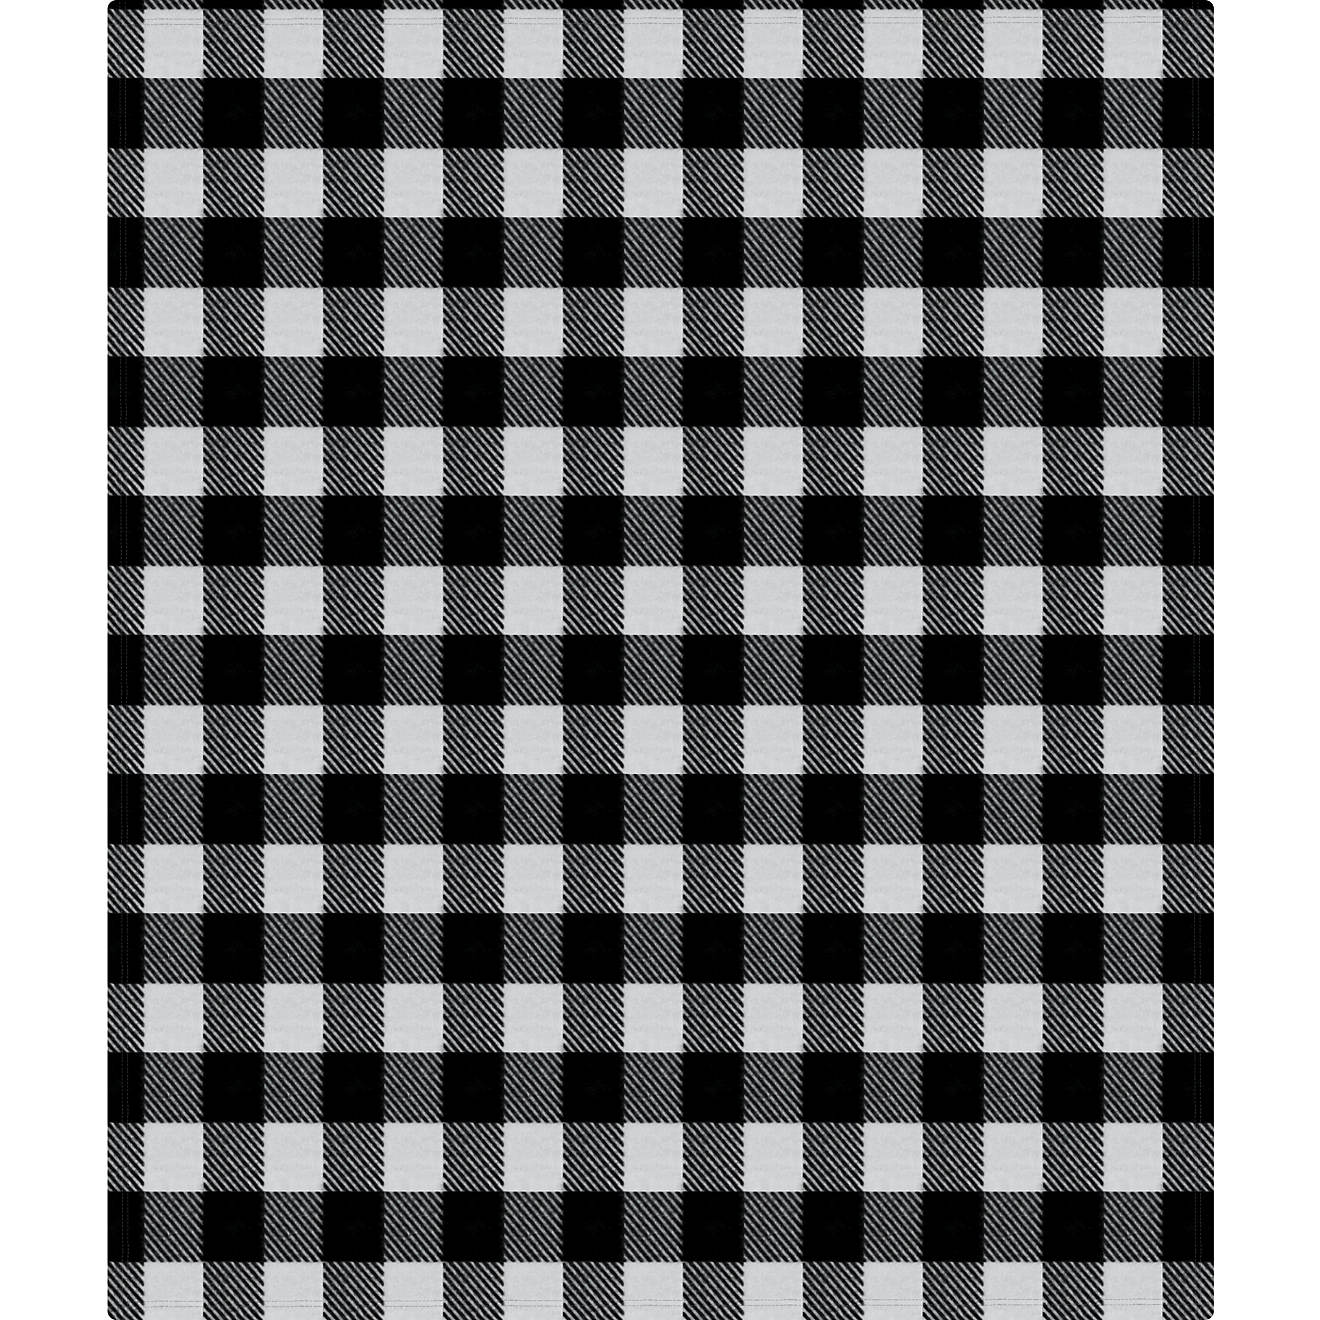 Snowcap 50 in x 60 in Black/White Fleece Buffalo Check Throw Blanket                                                             - view number 1